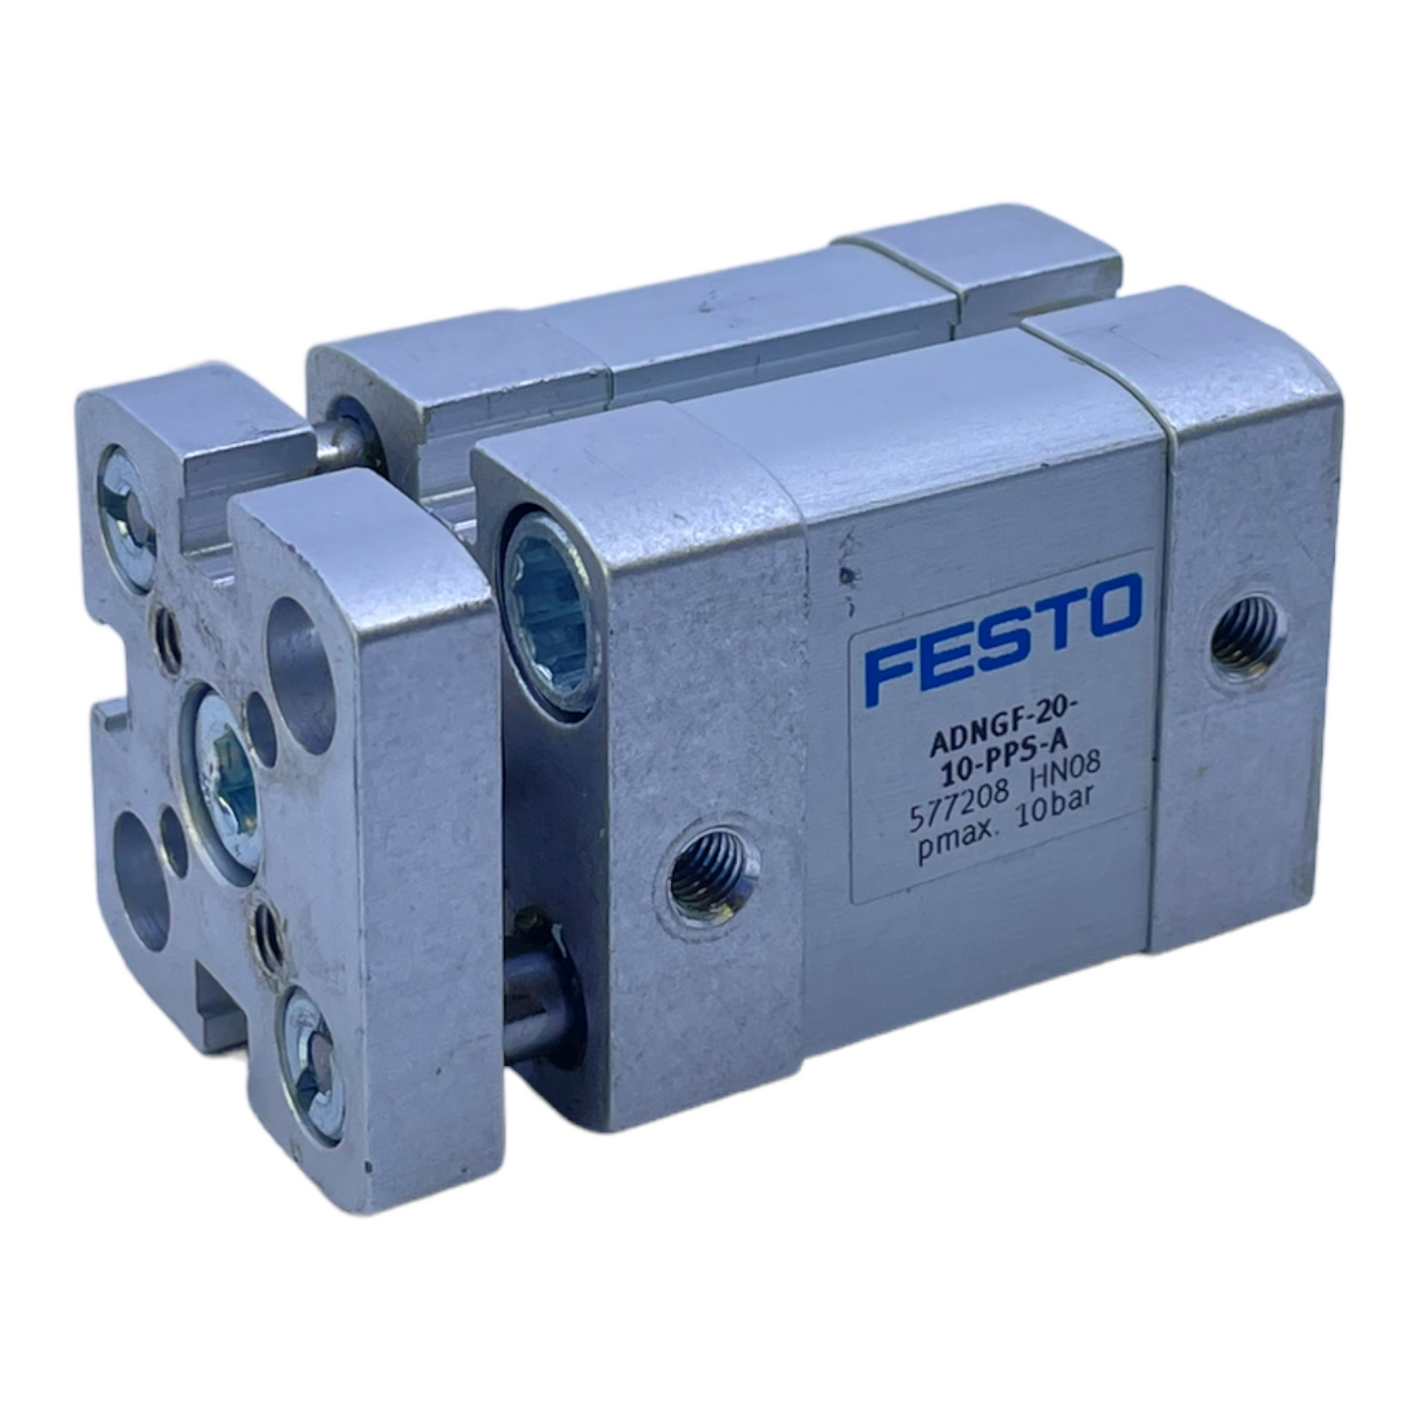 Festo ADNGF-20-10-PPS-A compact cylinder 577208 1.9 to 10 bar double-acting